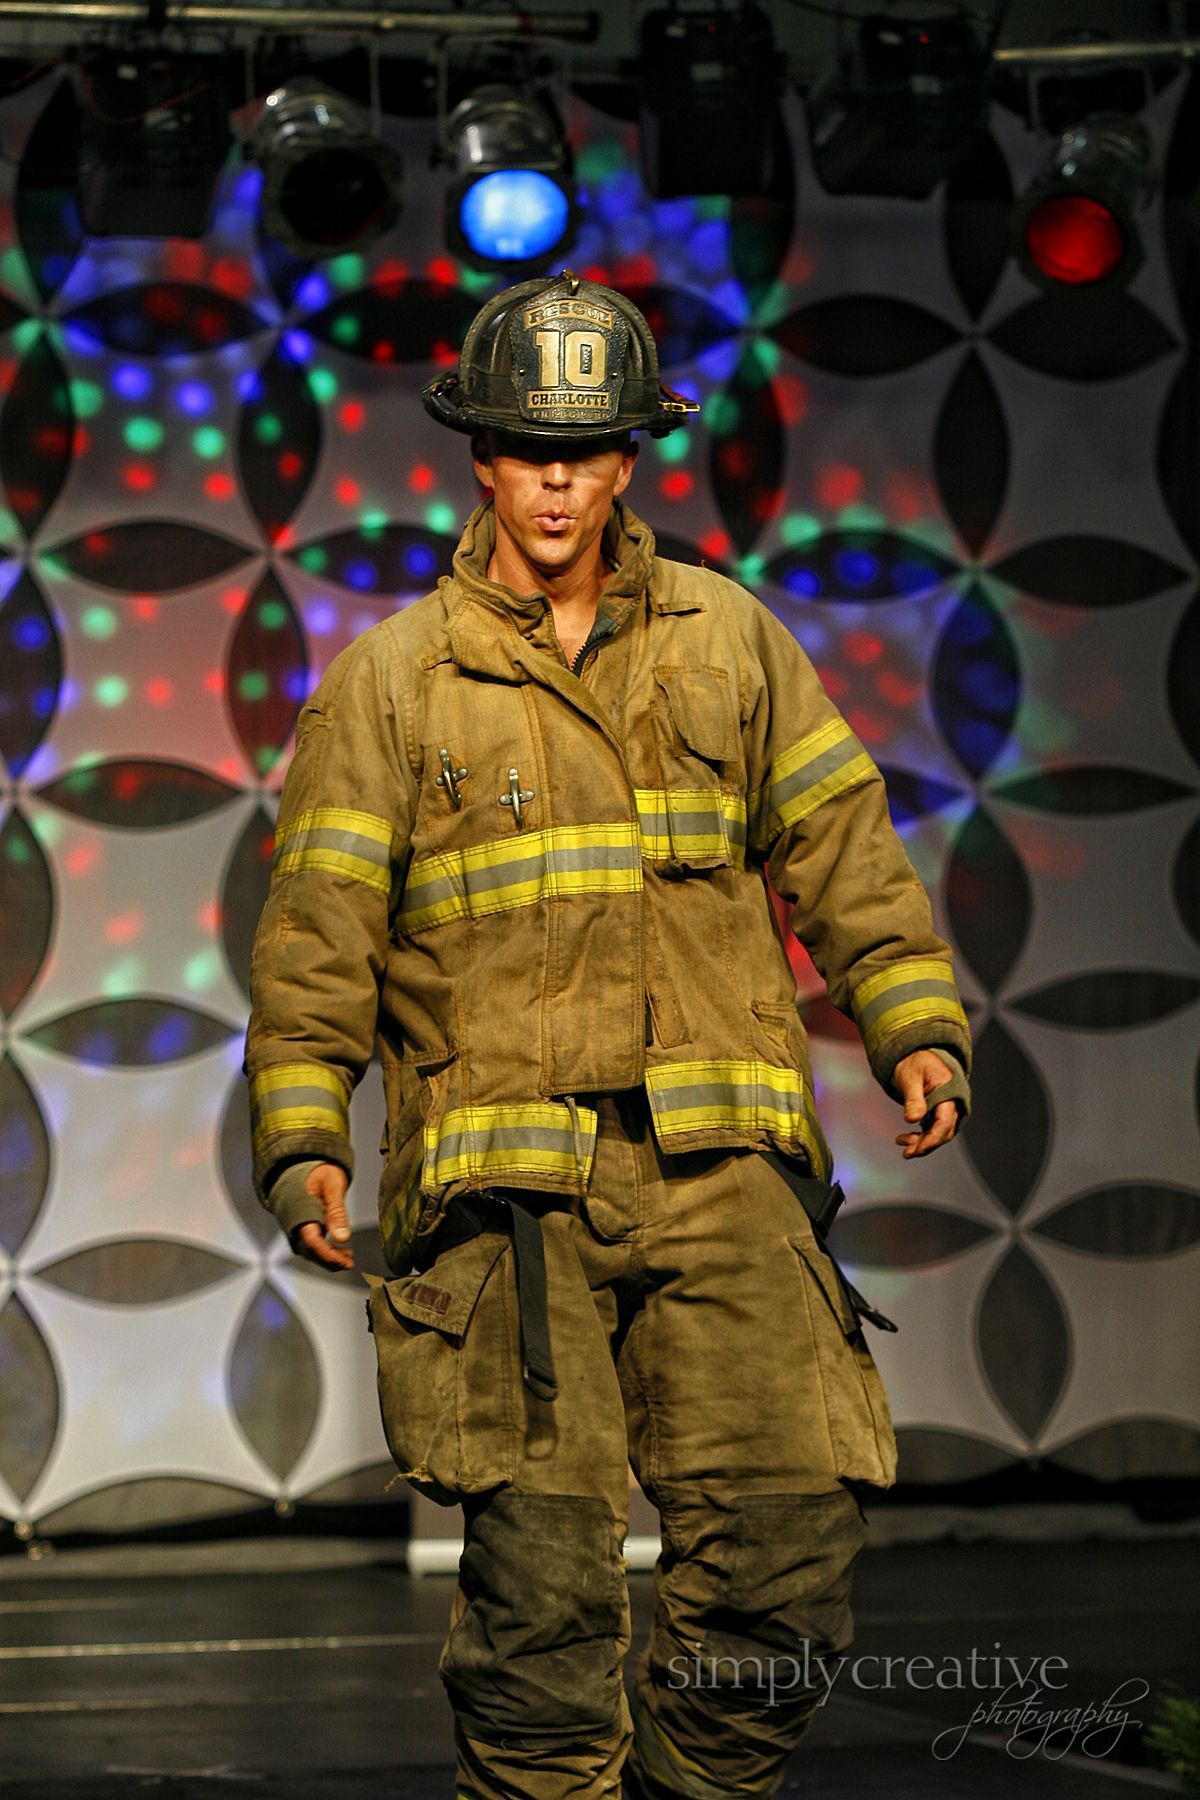 Firefighters Charity Fashion Shows at Michigan International Women’s Show